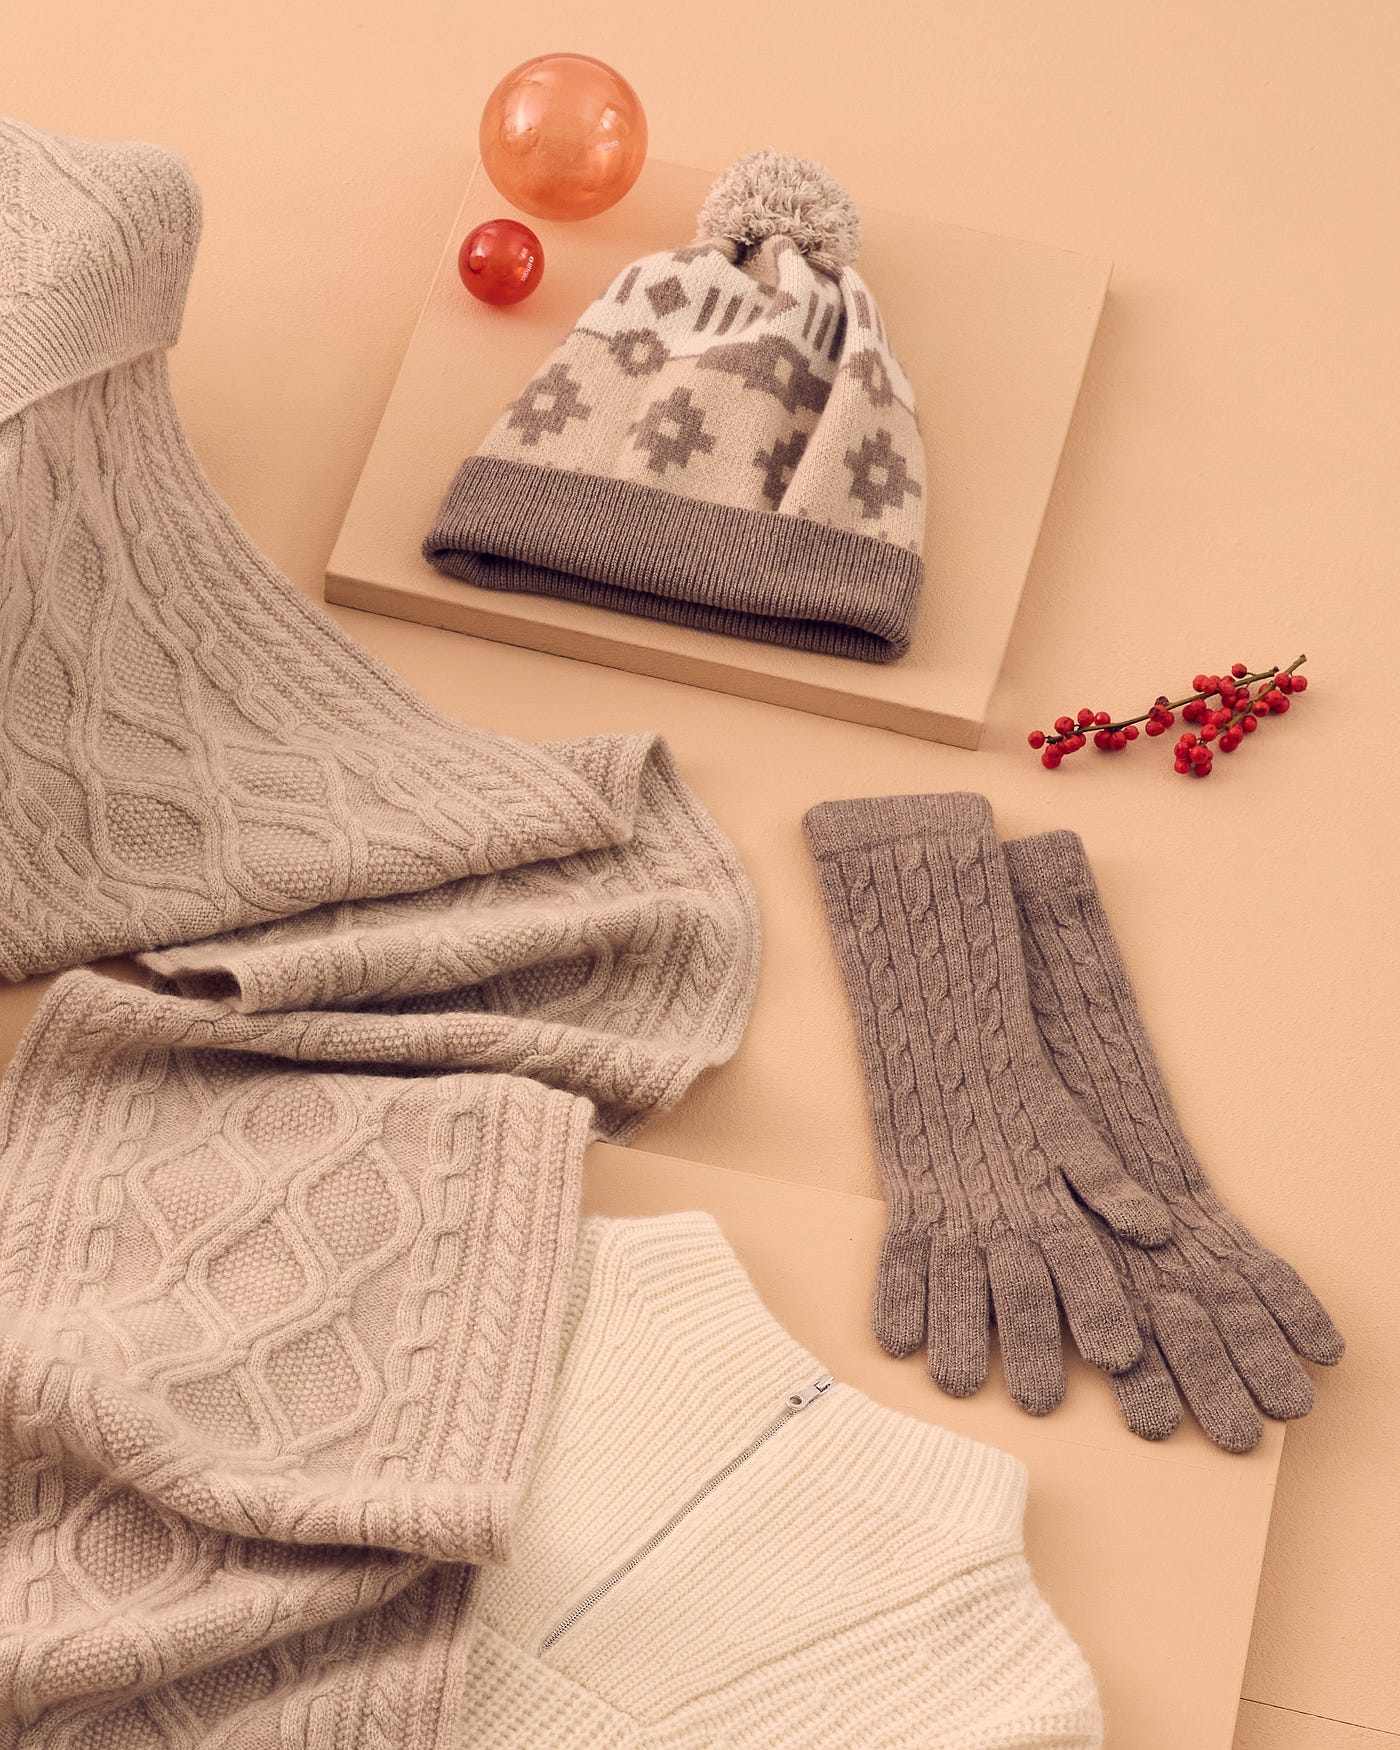 Holiday Gift Guide: Cozy Gifts For Her - Classy Yet Trendy